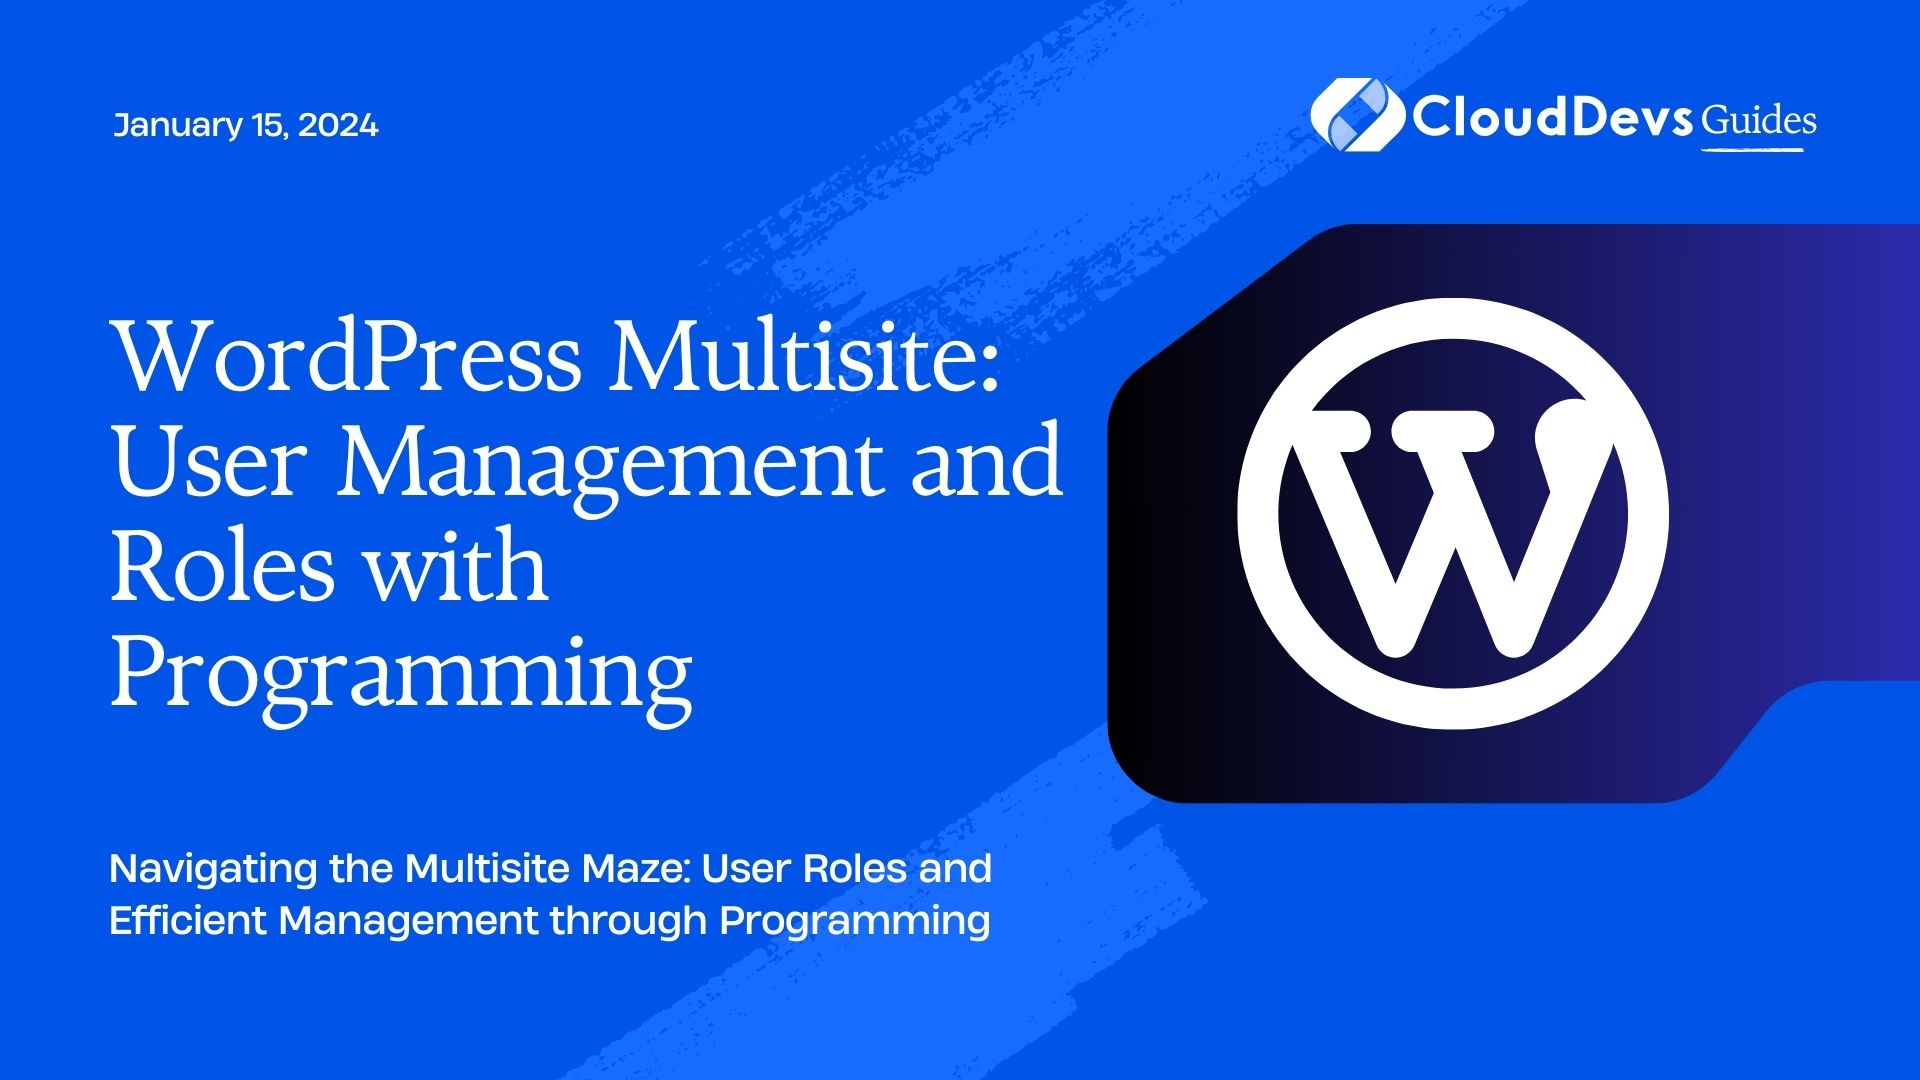 WordPress Multisite: User Management and Roles with Programming